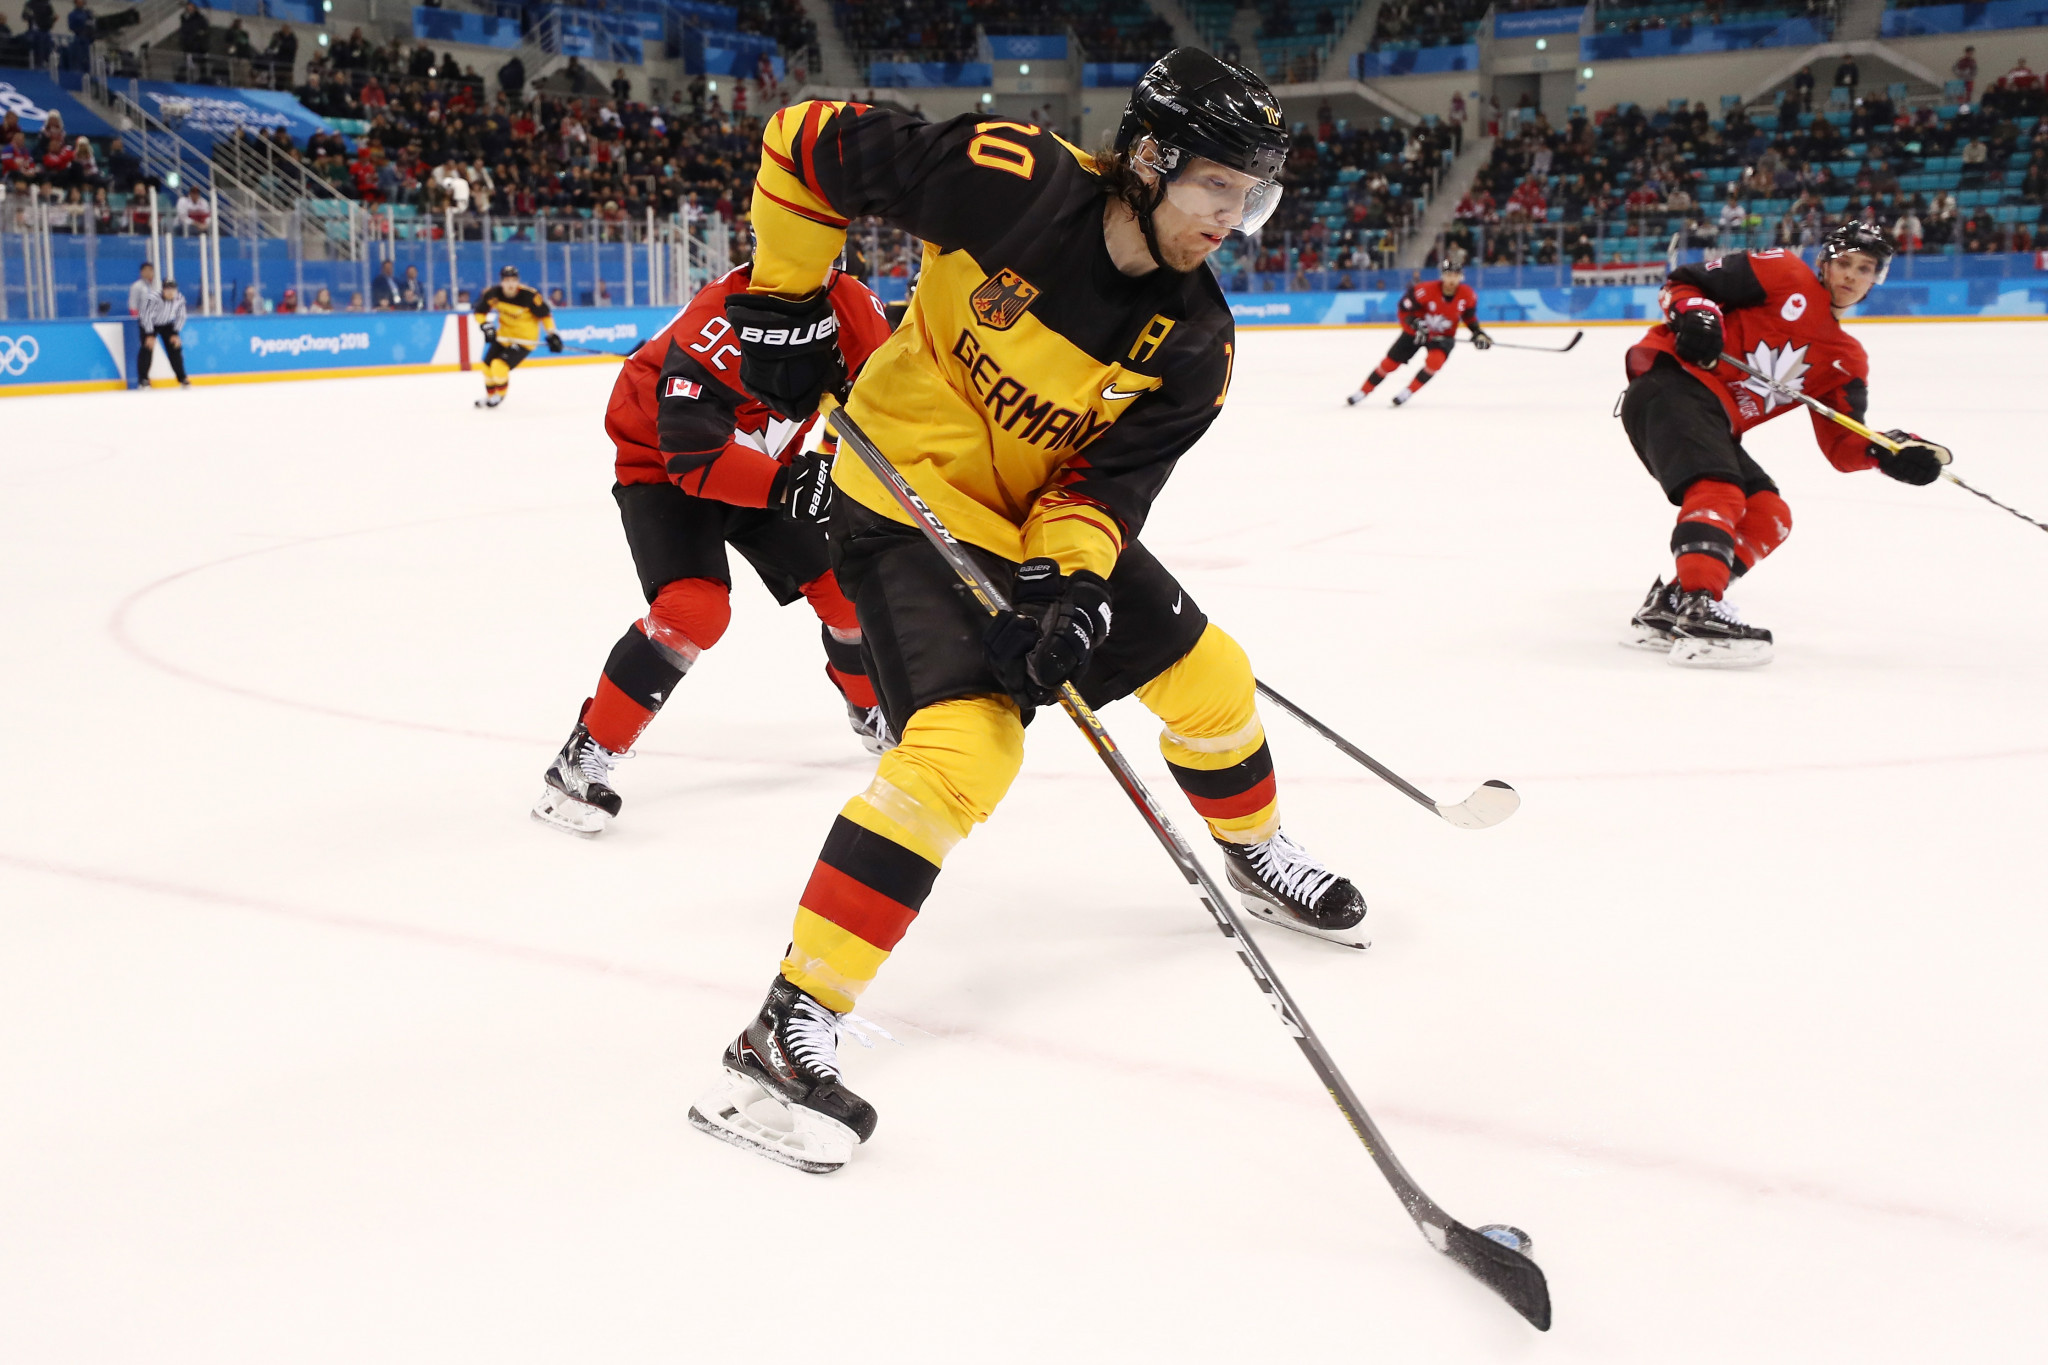 German ice hockey Olympian retires after Pyeongchang 2018 silver